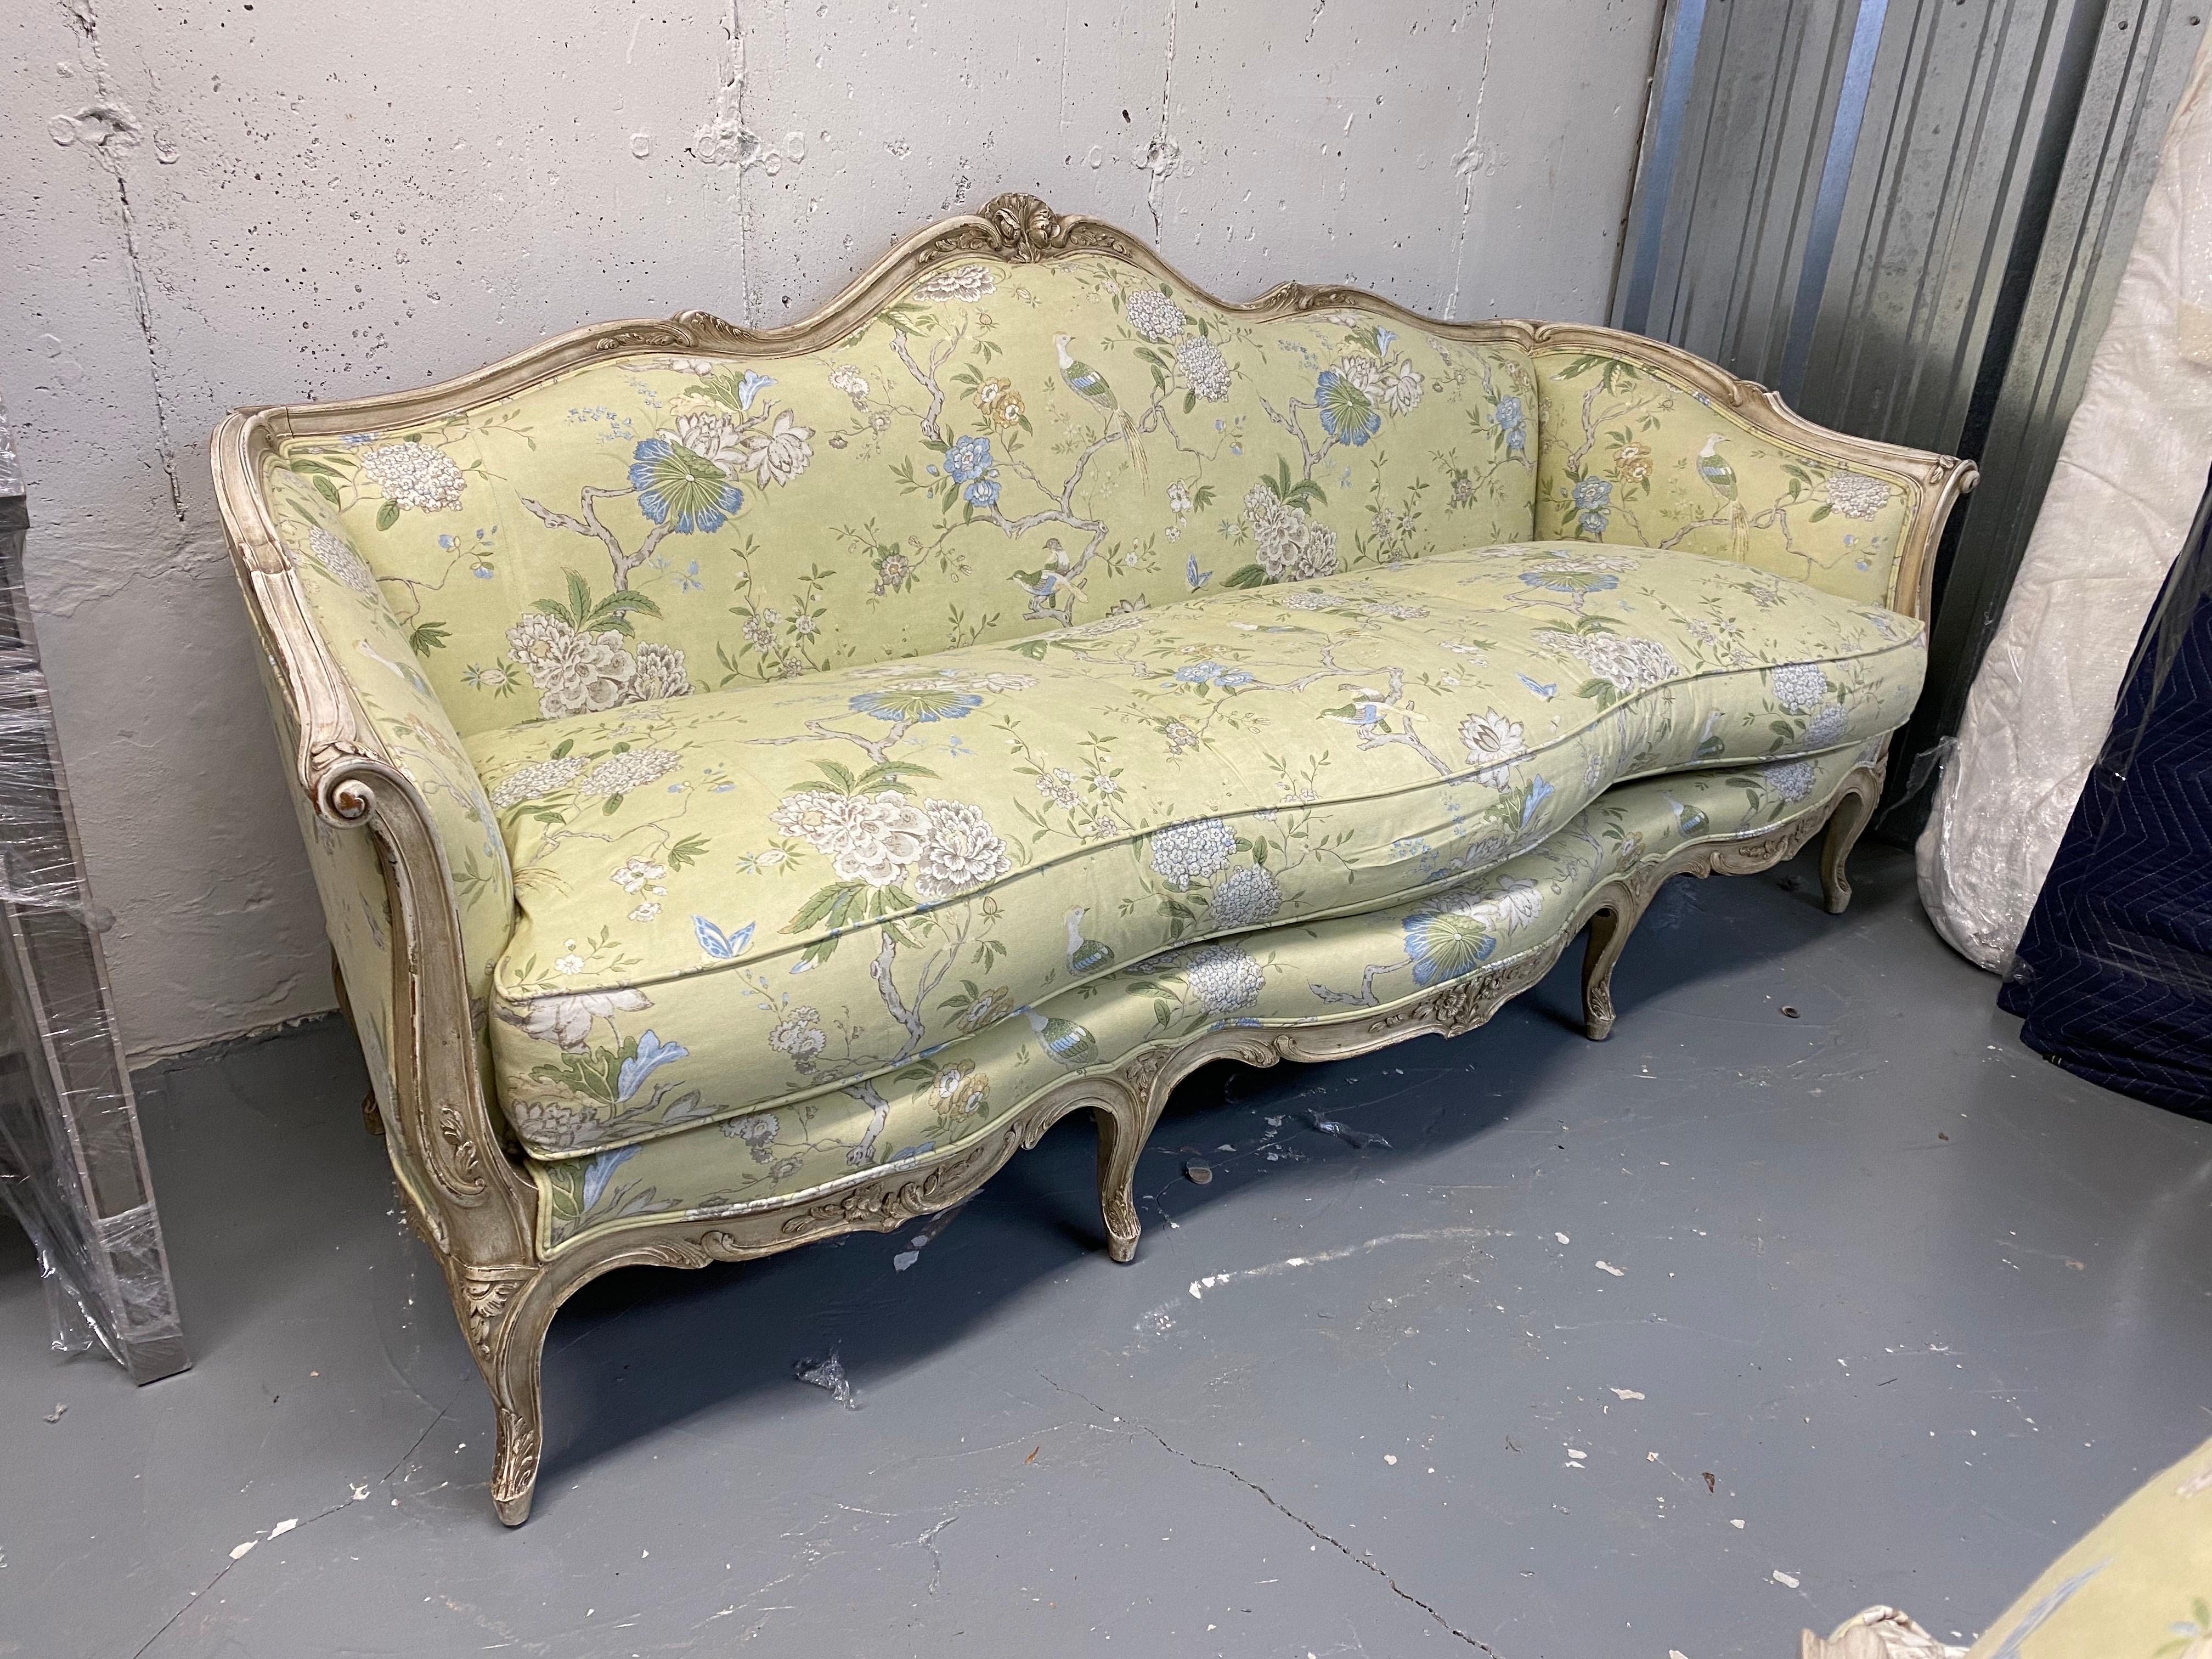 20th Century Louis XV Style Upholstered Sofa
A French Louis XV style white washed wood frame sofa upholstered in a bright green-yellow cotton chinoiserie fabric. Front of sofa in a lovely curved serpentine shape. 
Some light wear on finish on legs.